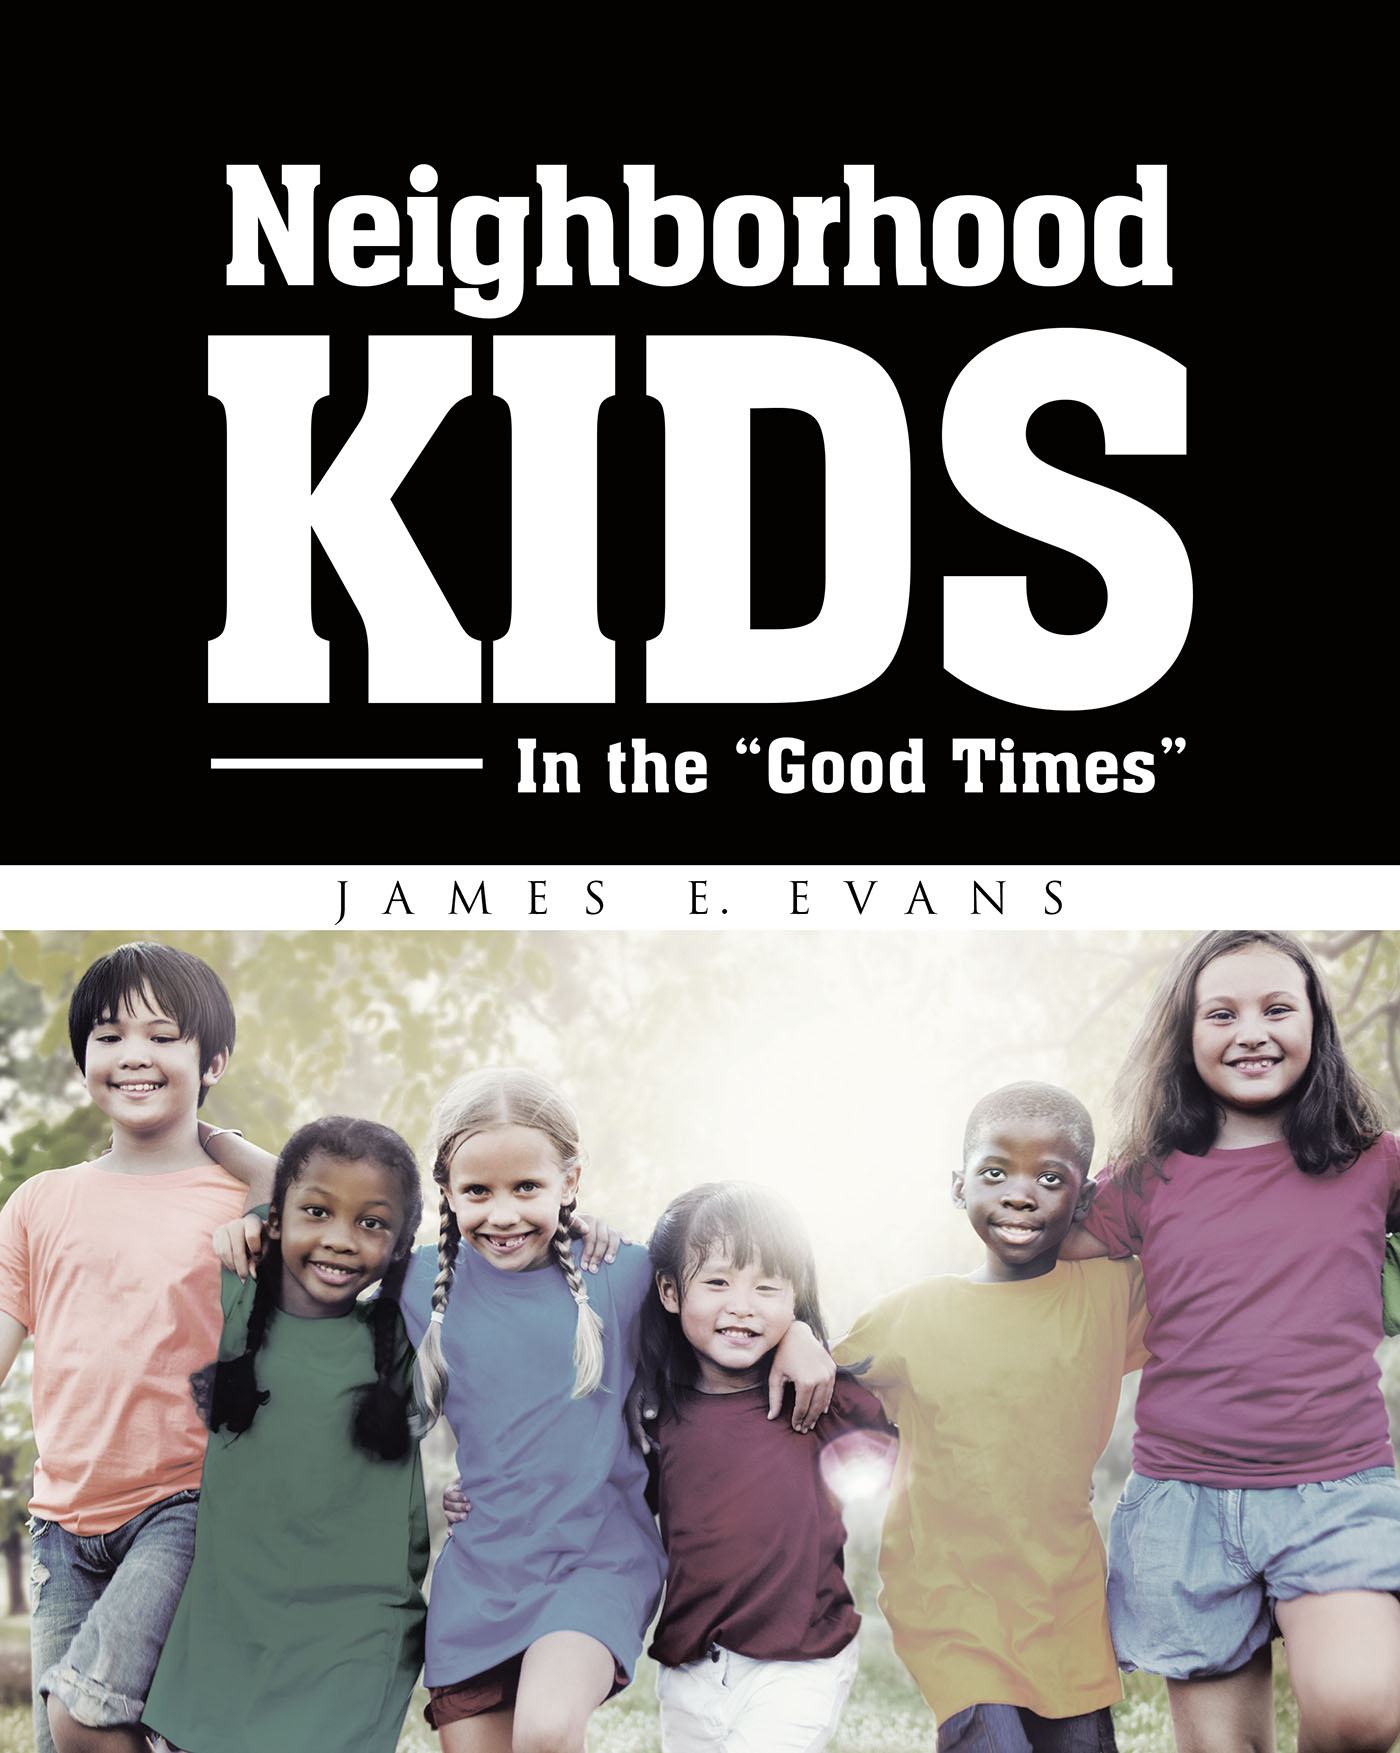 Author James Evans’s New Book, "Neighborhood Kids: In the ‘Good Times,’" Follows Young J-Jay and His Neighborhood Friends as They Practice Their Creative Skills